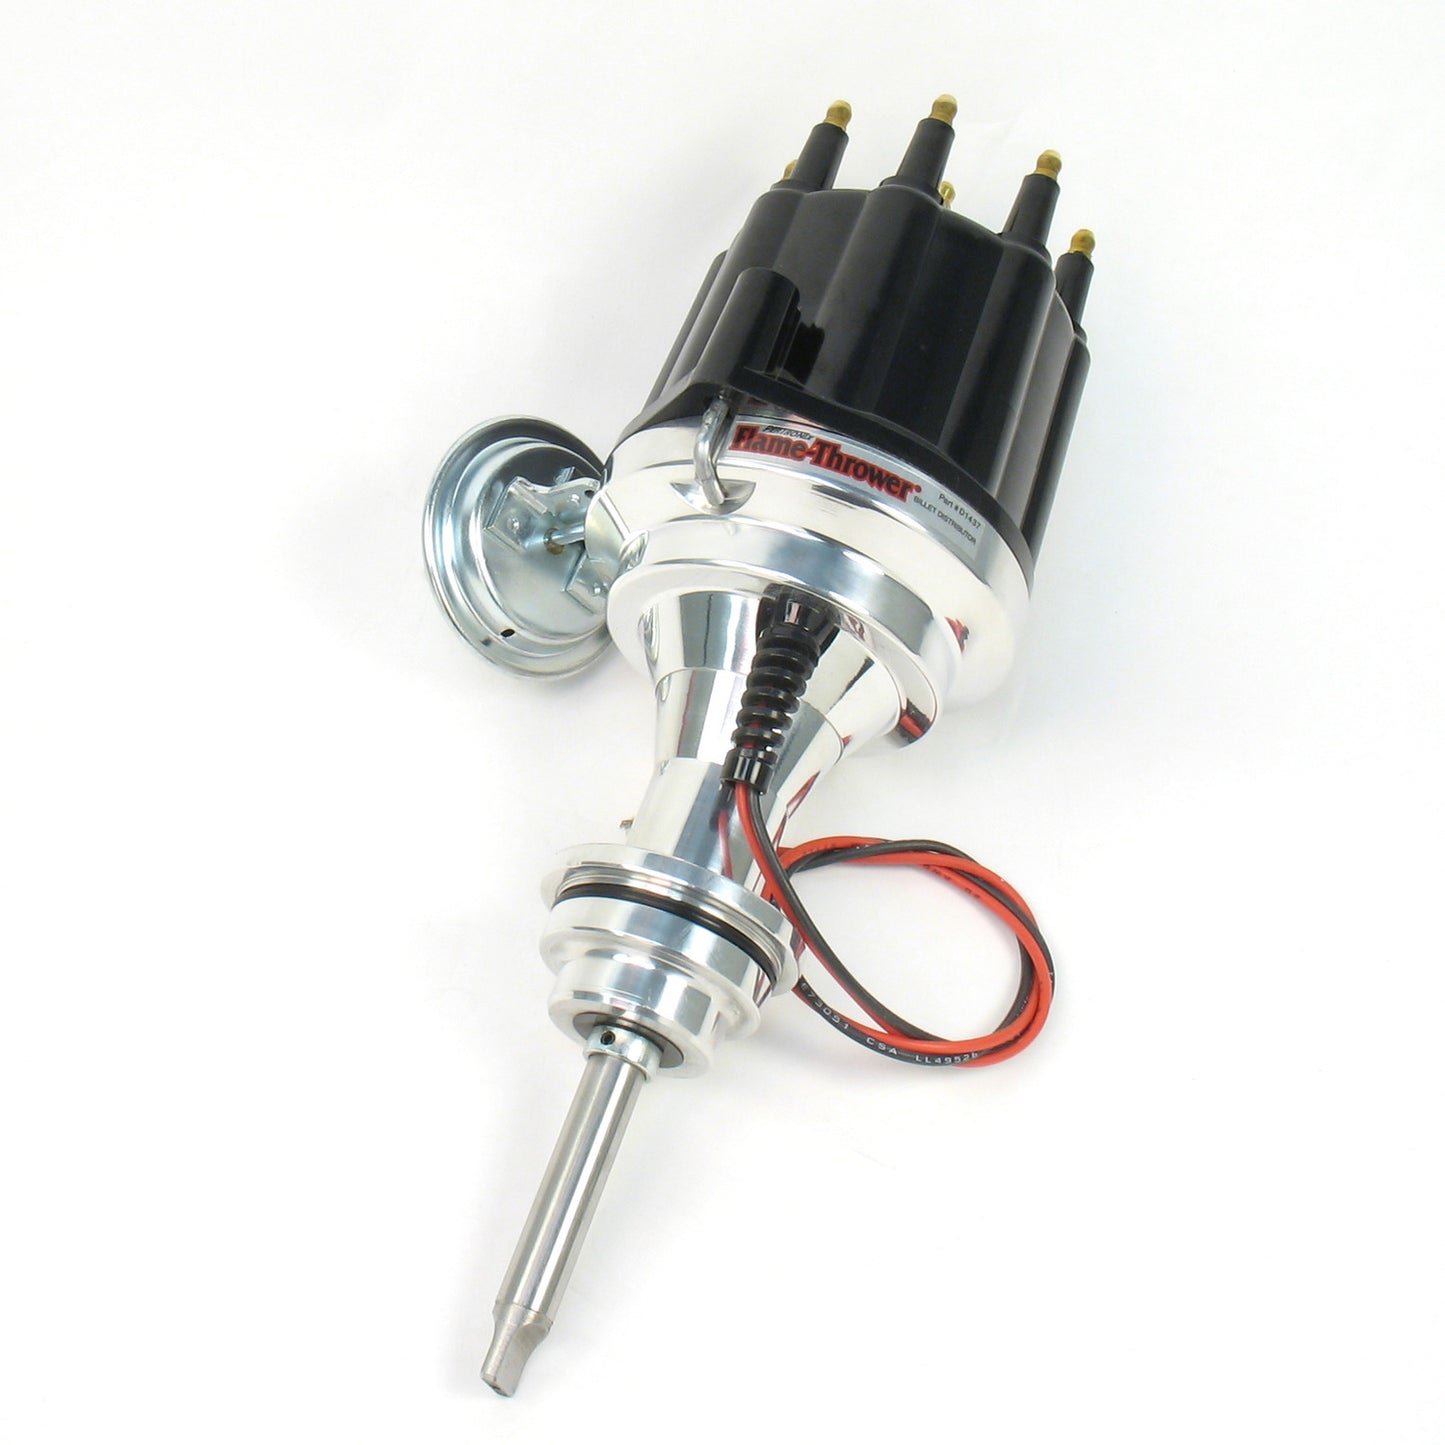 PerTronix D7143710 Flame-Thrower Electronic Distributor Billet Chrysler/Dodge/Plymouth 426-440 with Ignitor III Vacuum Advance Black Male Cap